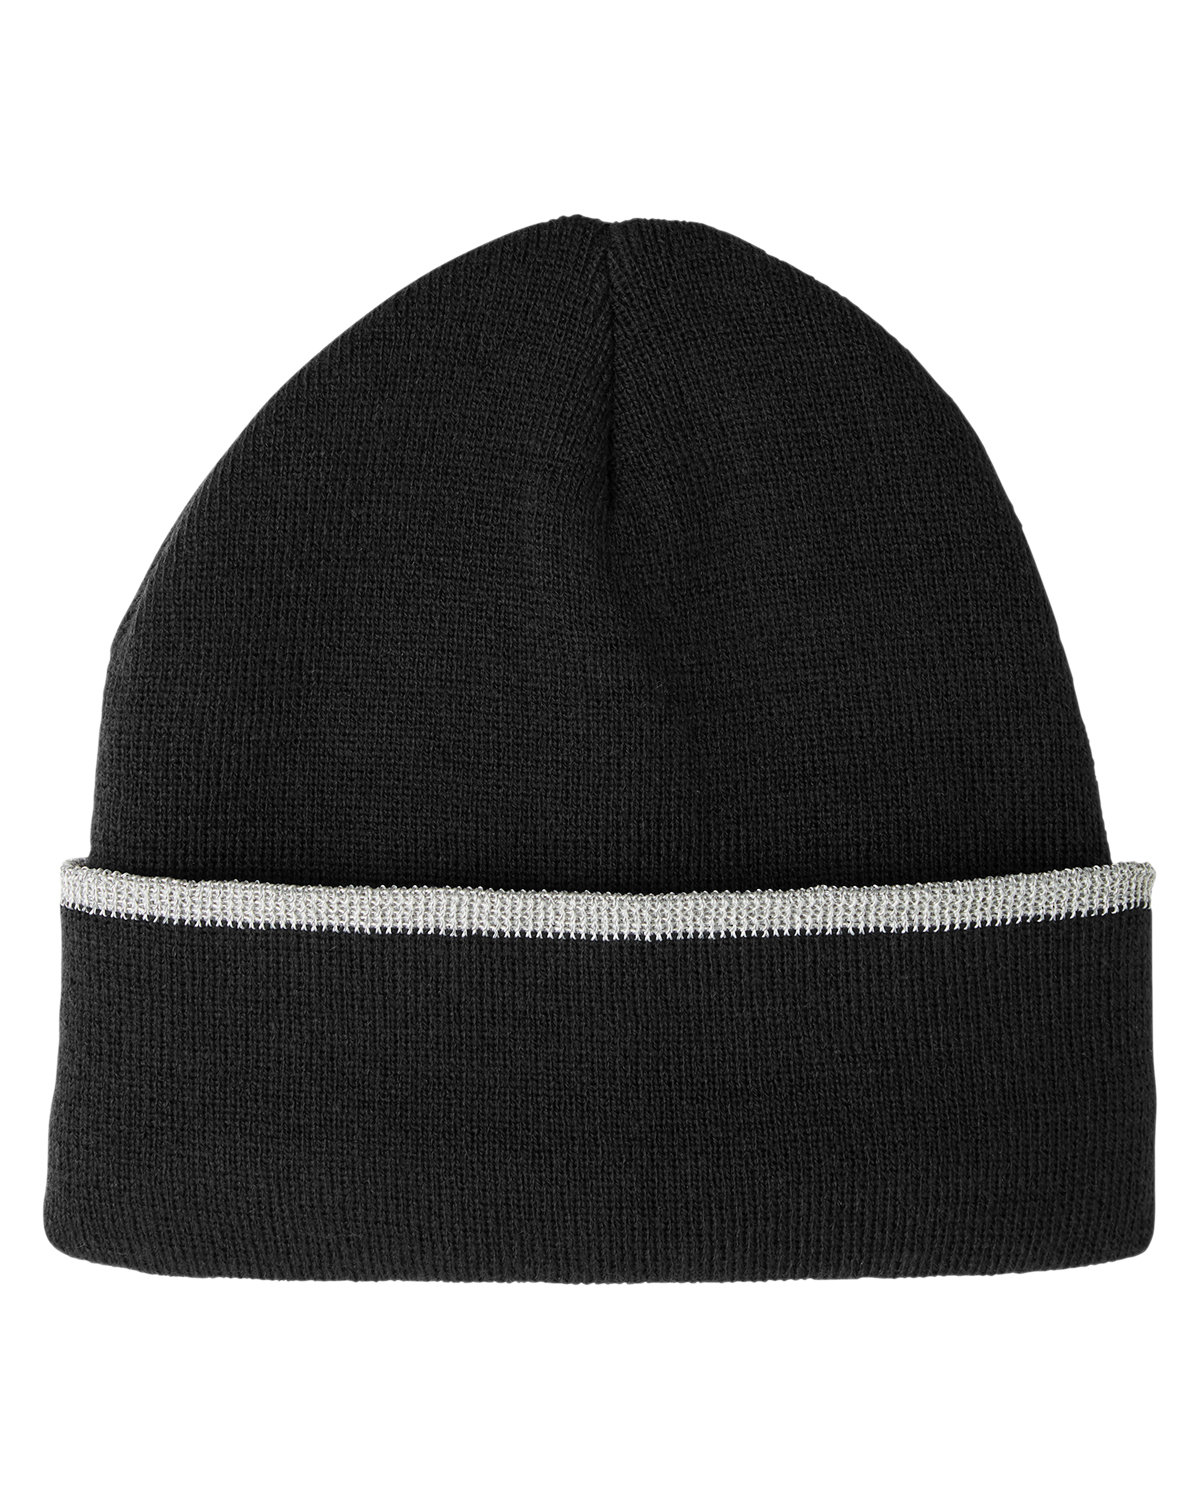 Harriton ClimaBloc™ Lined Reflective Beanie BLACK 